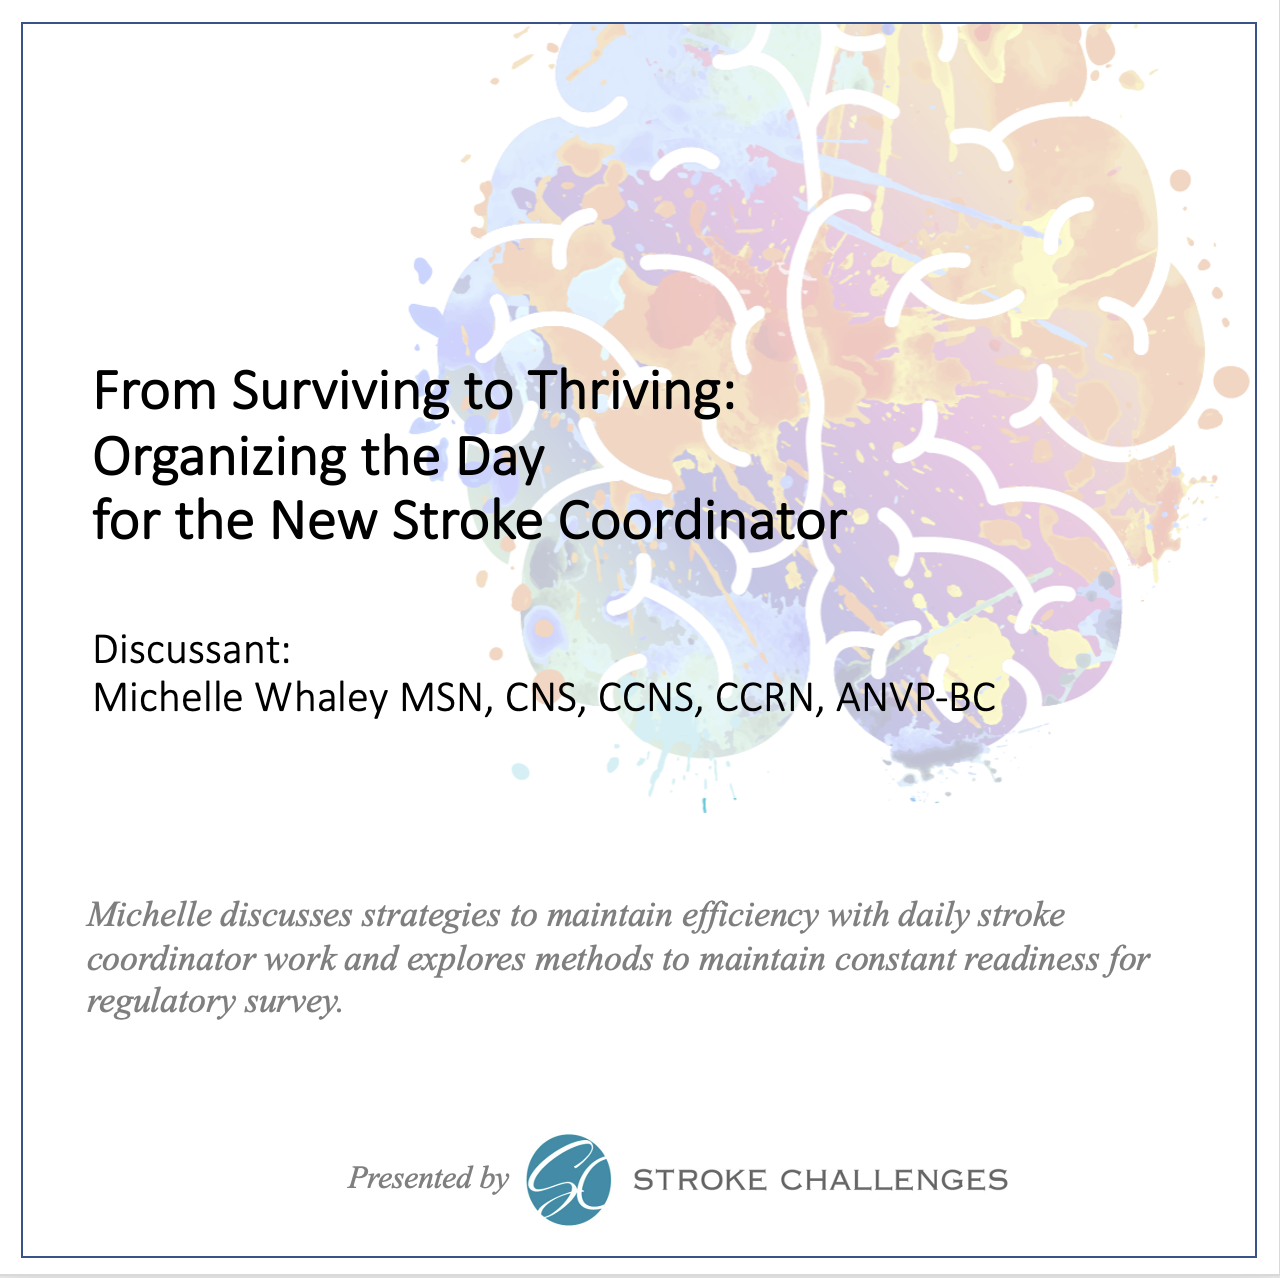 FROM SURVIVING TO THRIVING: ORGANIZING THE DAY, WEEK, MONTH FOR THE NEW STROKE COORDINATOR